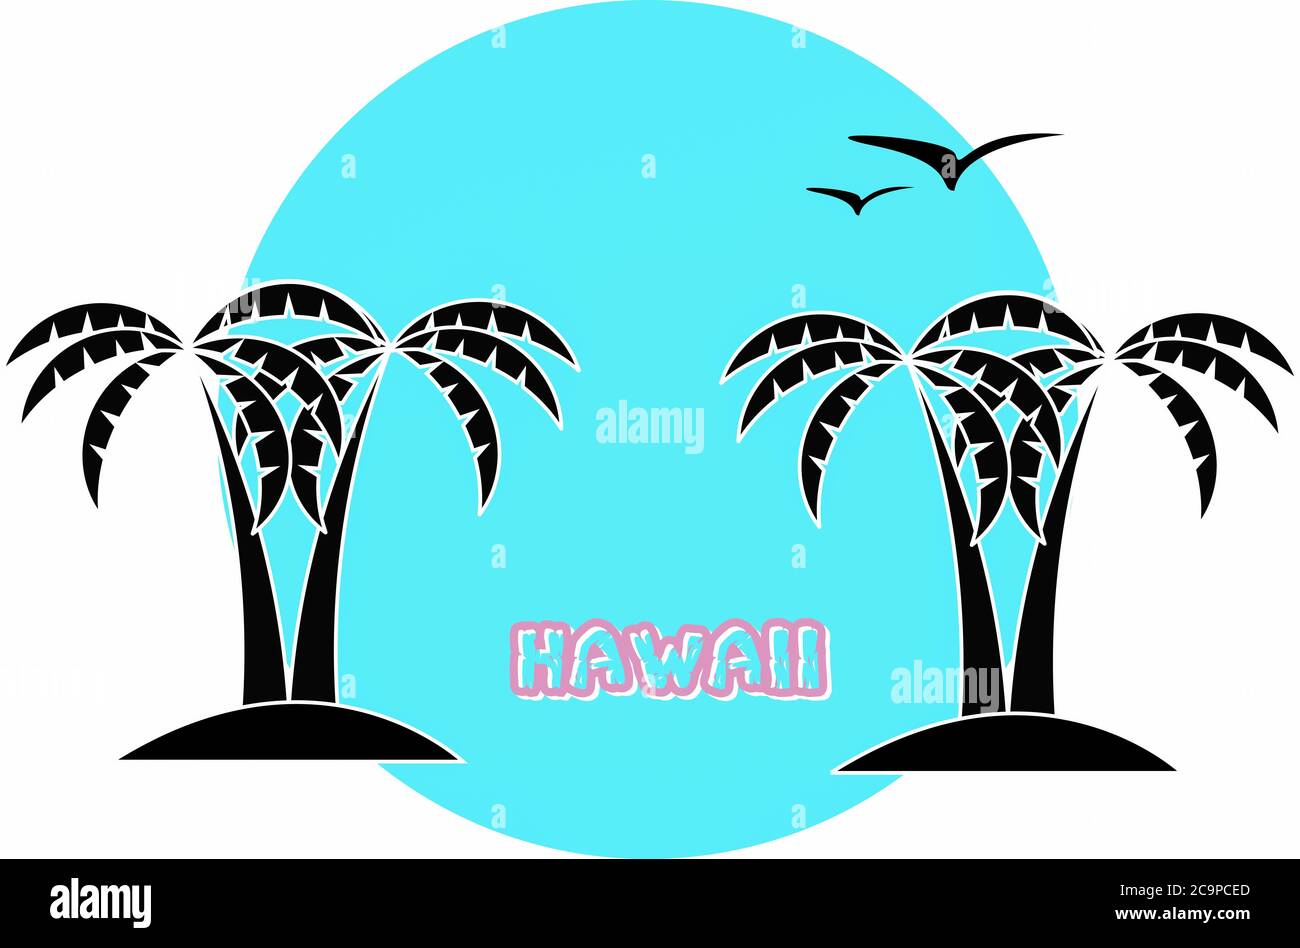 Stylized palm trees silhouettes and seagulls with Hawaii writing. Stock Photo